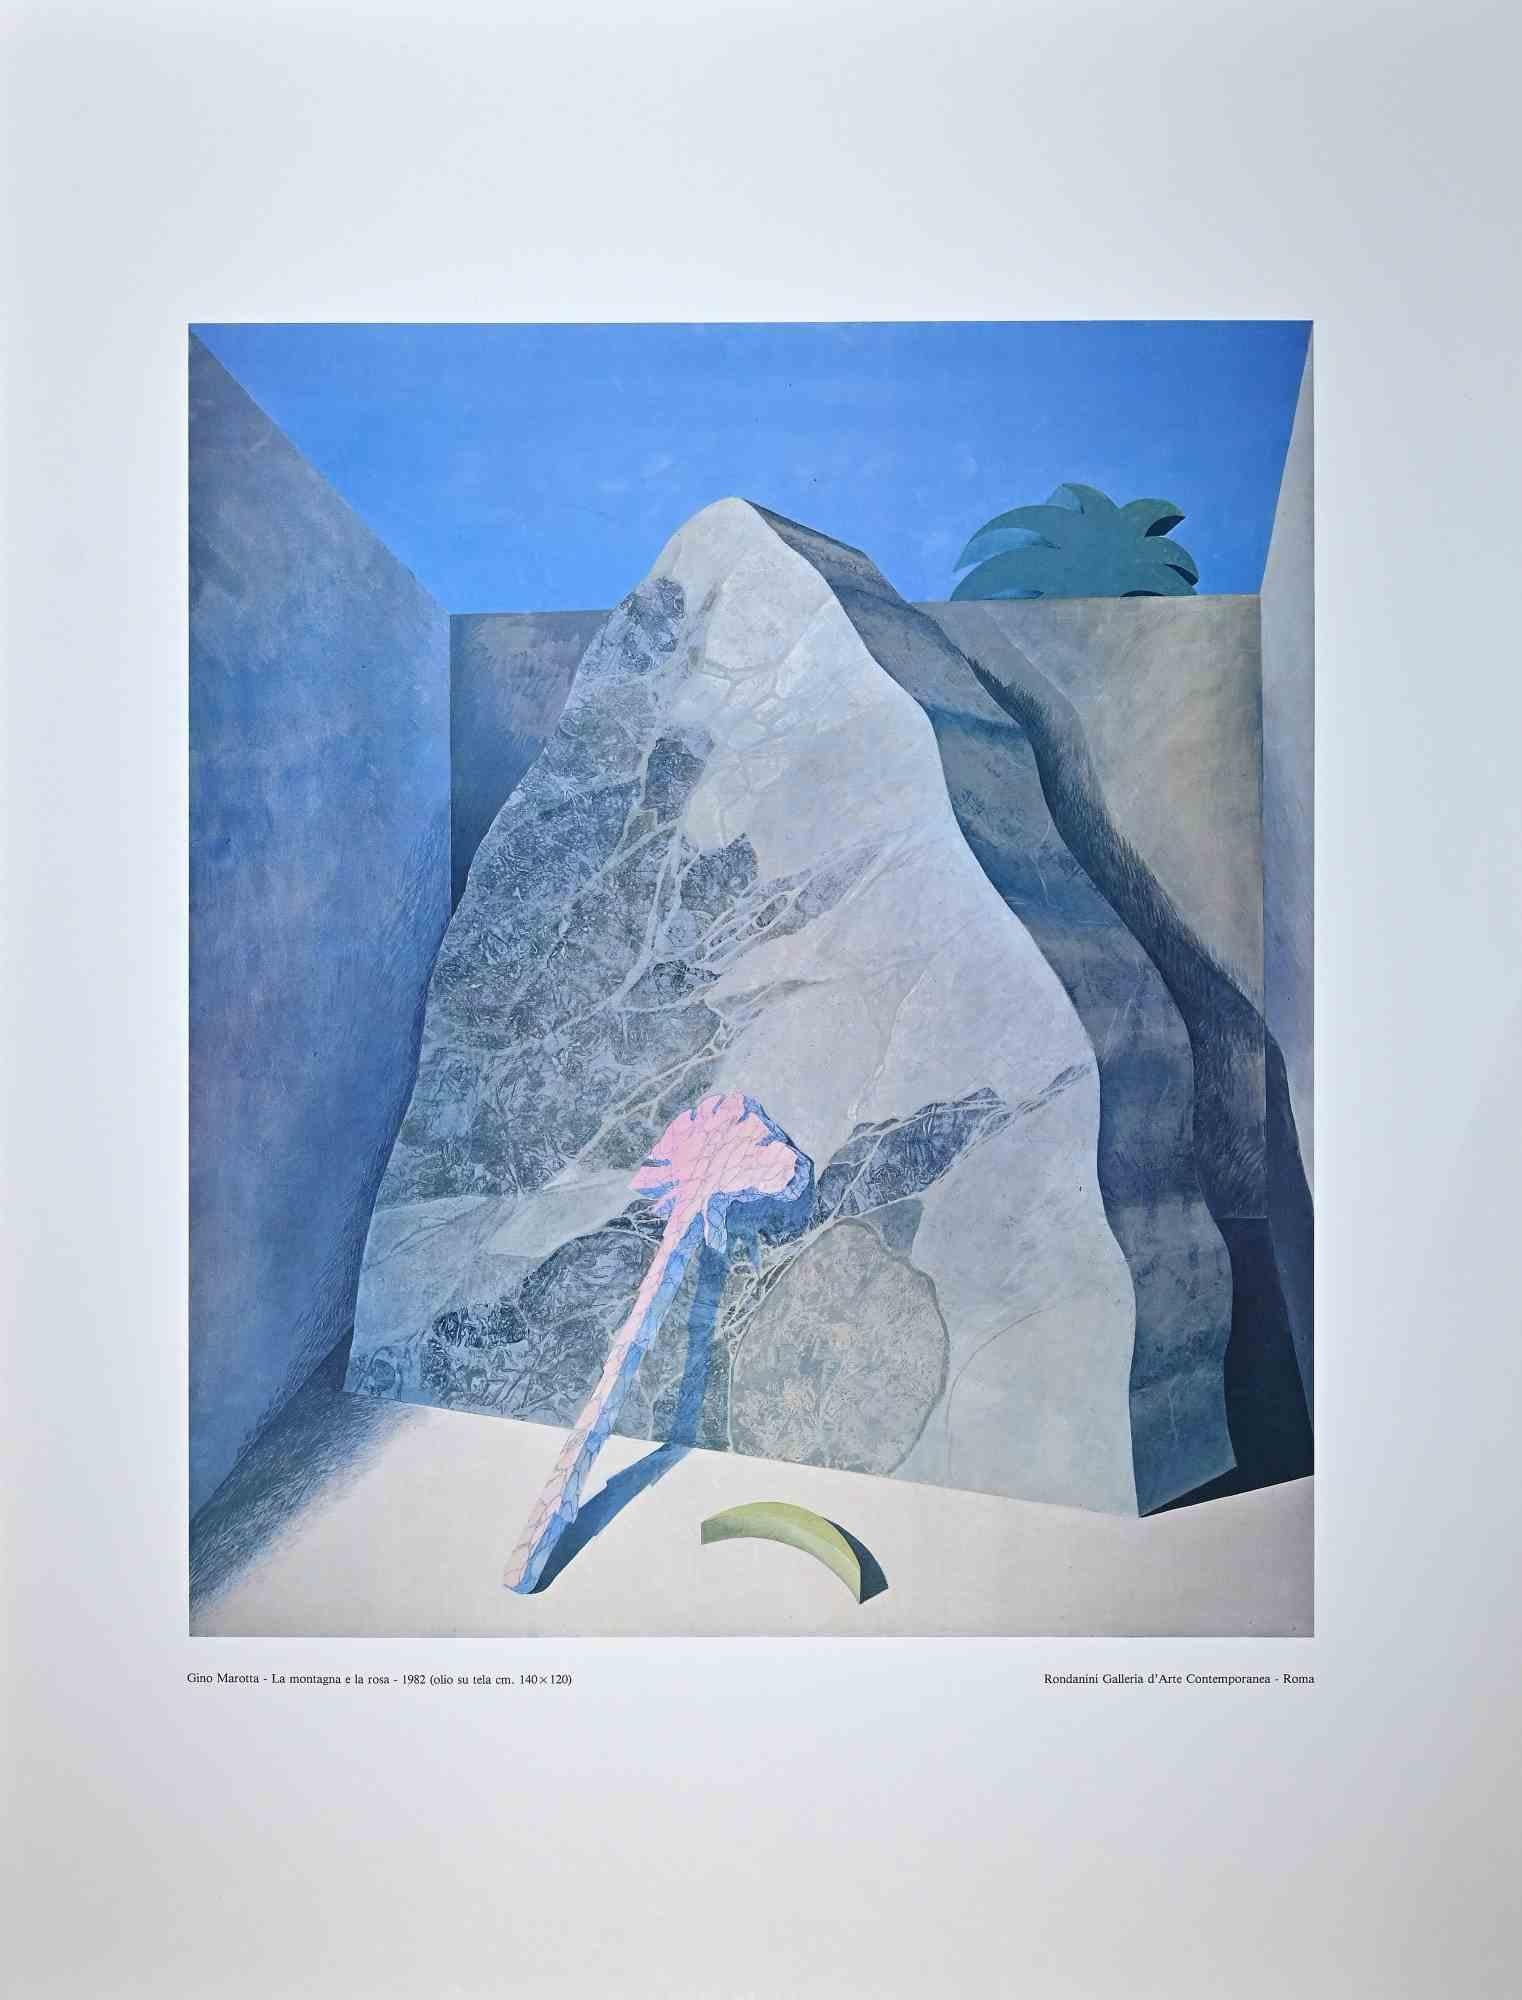 Gino Marotta Figurative Print - The Mountain and the Rose - Vintage Poster After G. Marotta - 1982